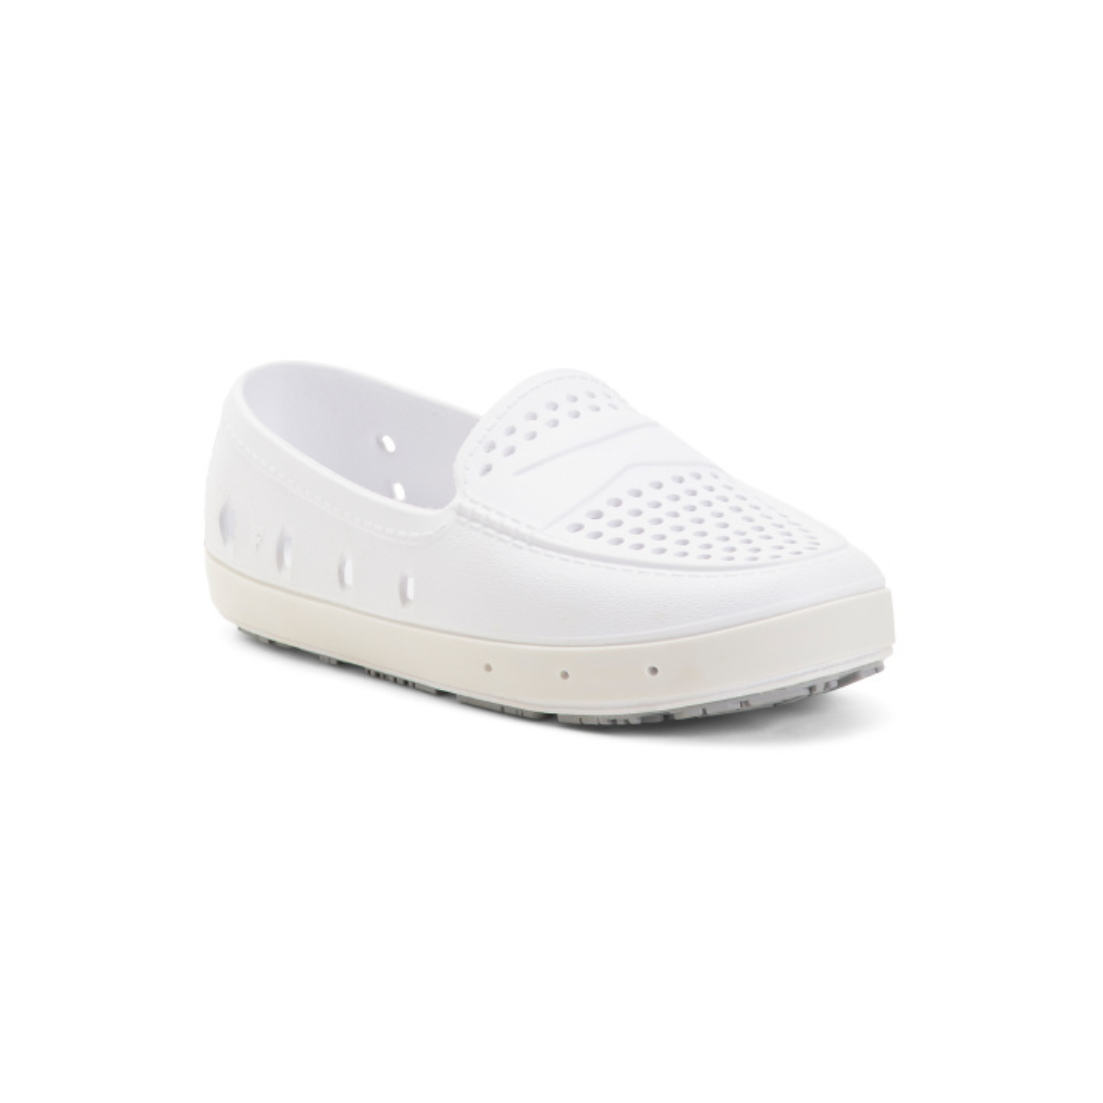 Floafers London Slip On Loafers